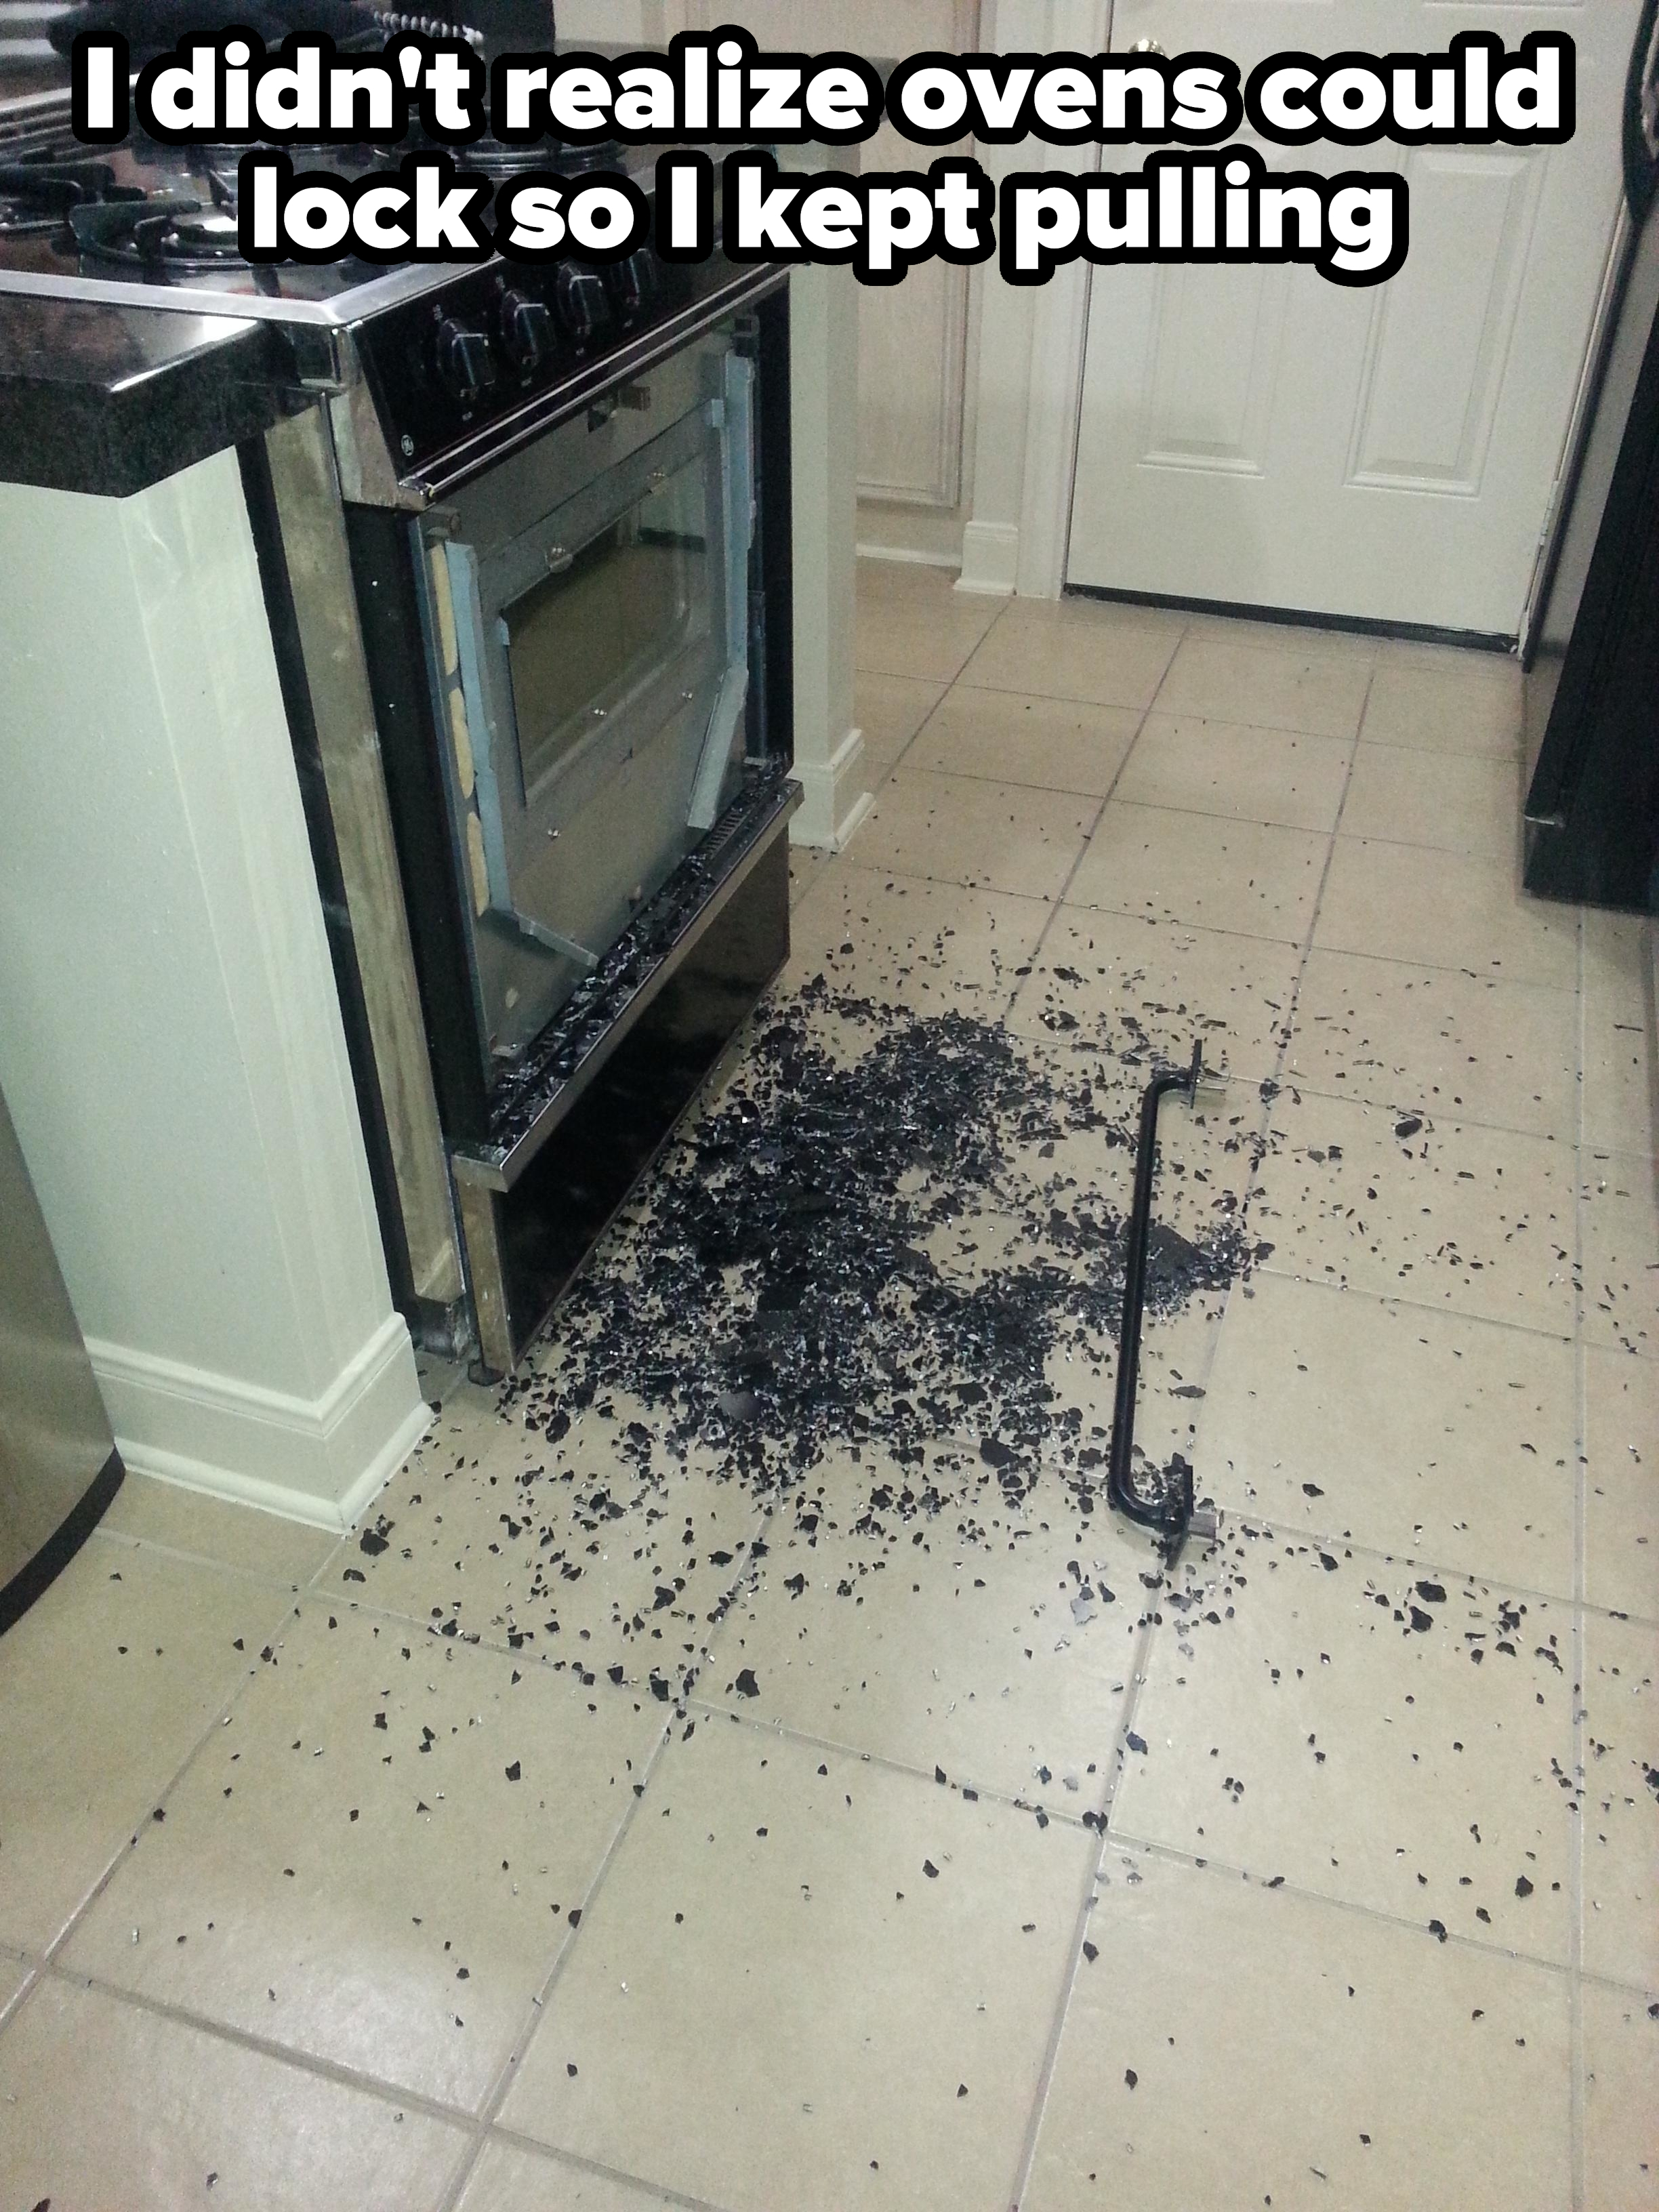 An oven with a shattered front door, with caption, &quot;I didn&#x27;t realize ovens could lock, so I kept pulling&quot;